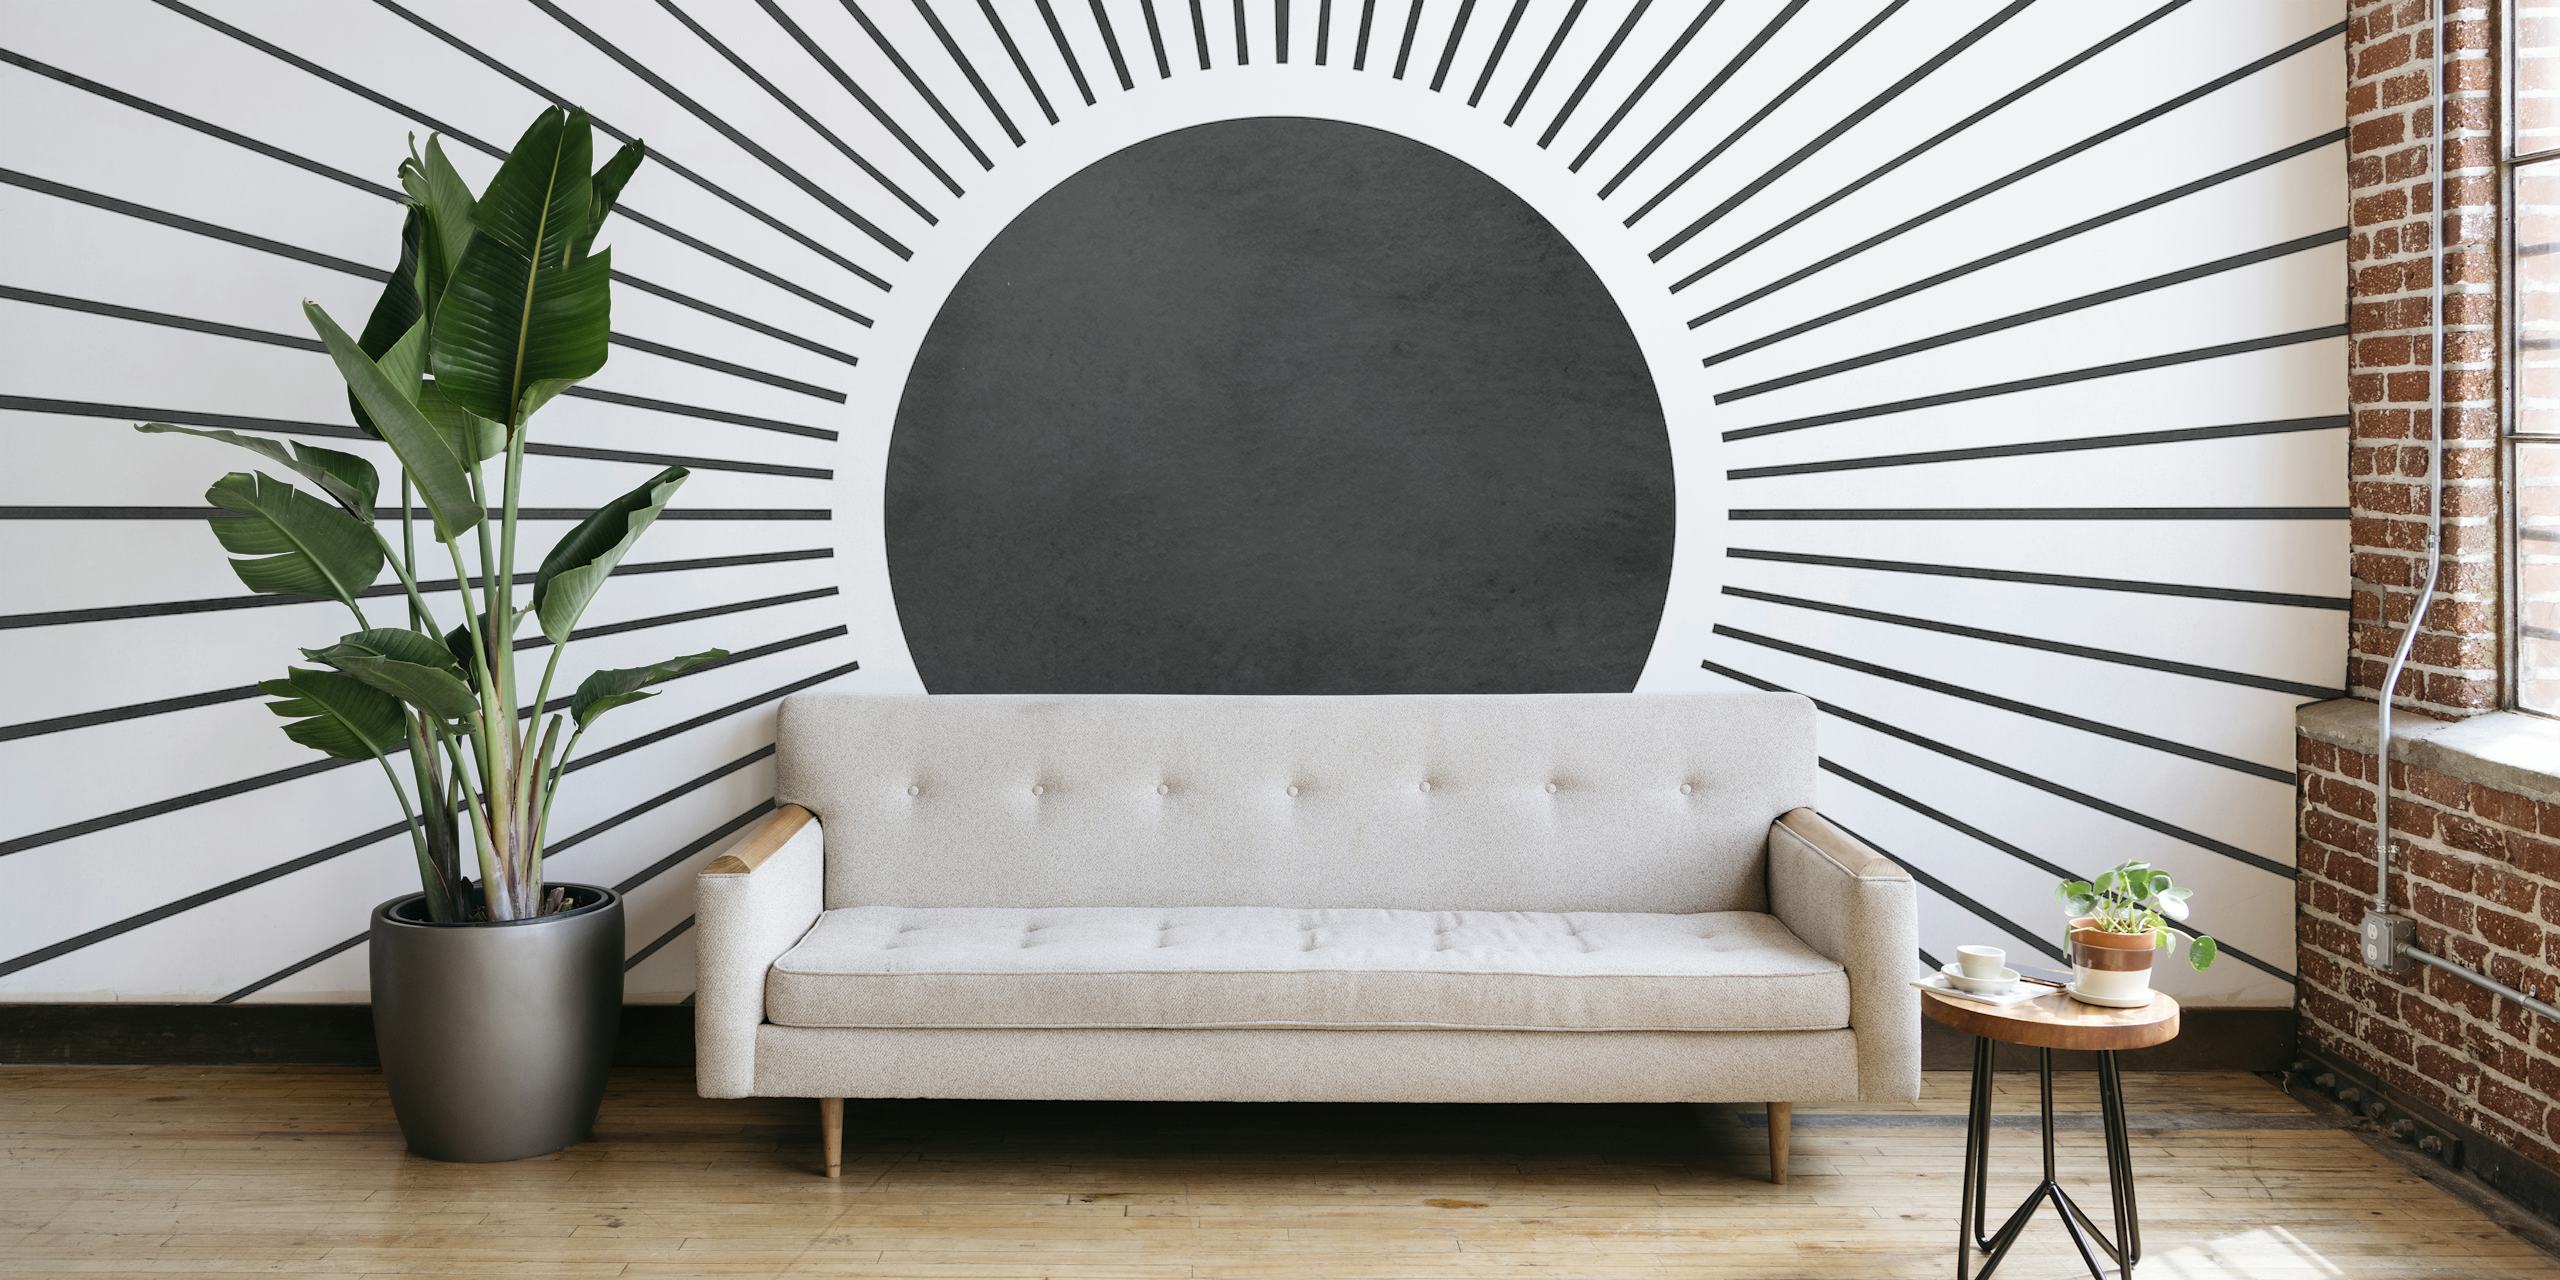 Monochrome sunbeam wall mural depicting a central eclipse with radiant lines